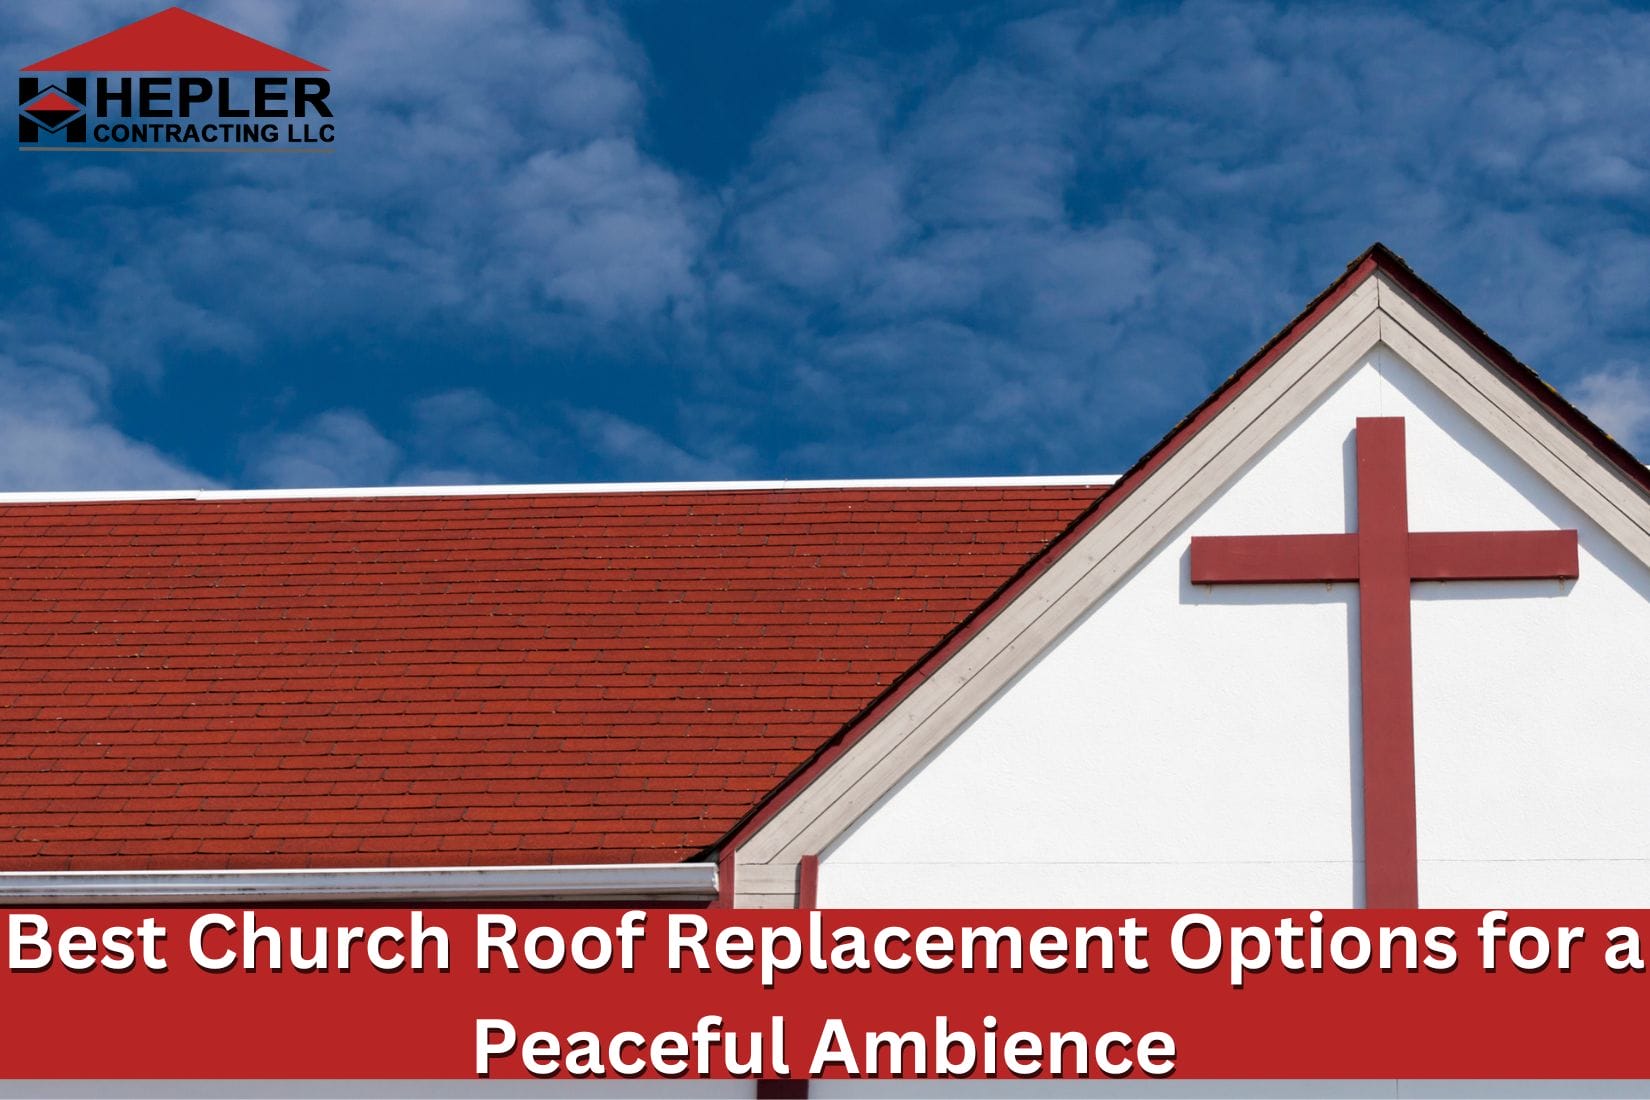 Best Church Roof Replacement Options for a Peaceful Ambience